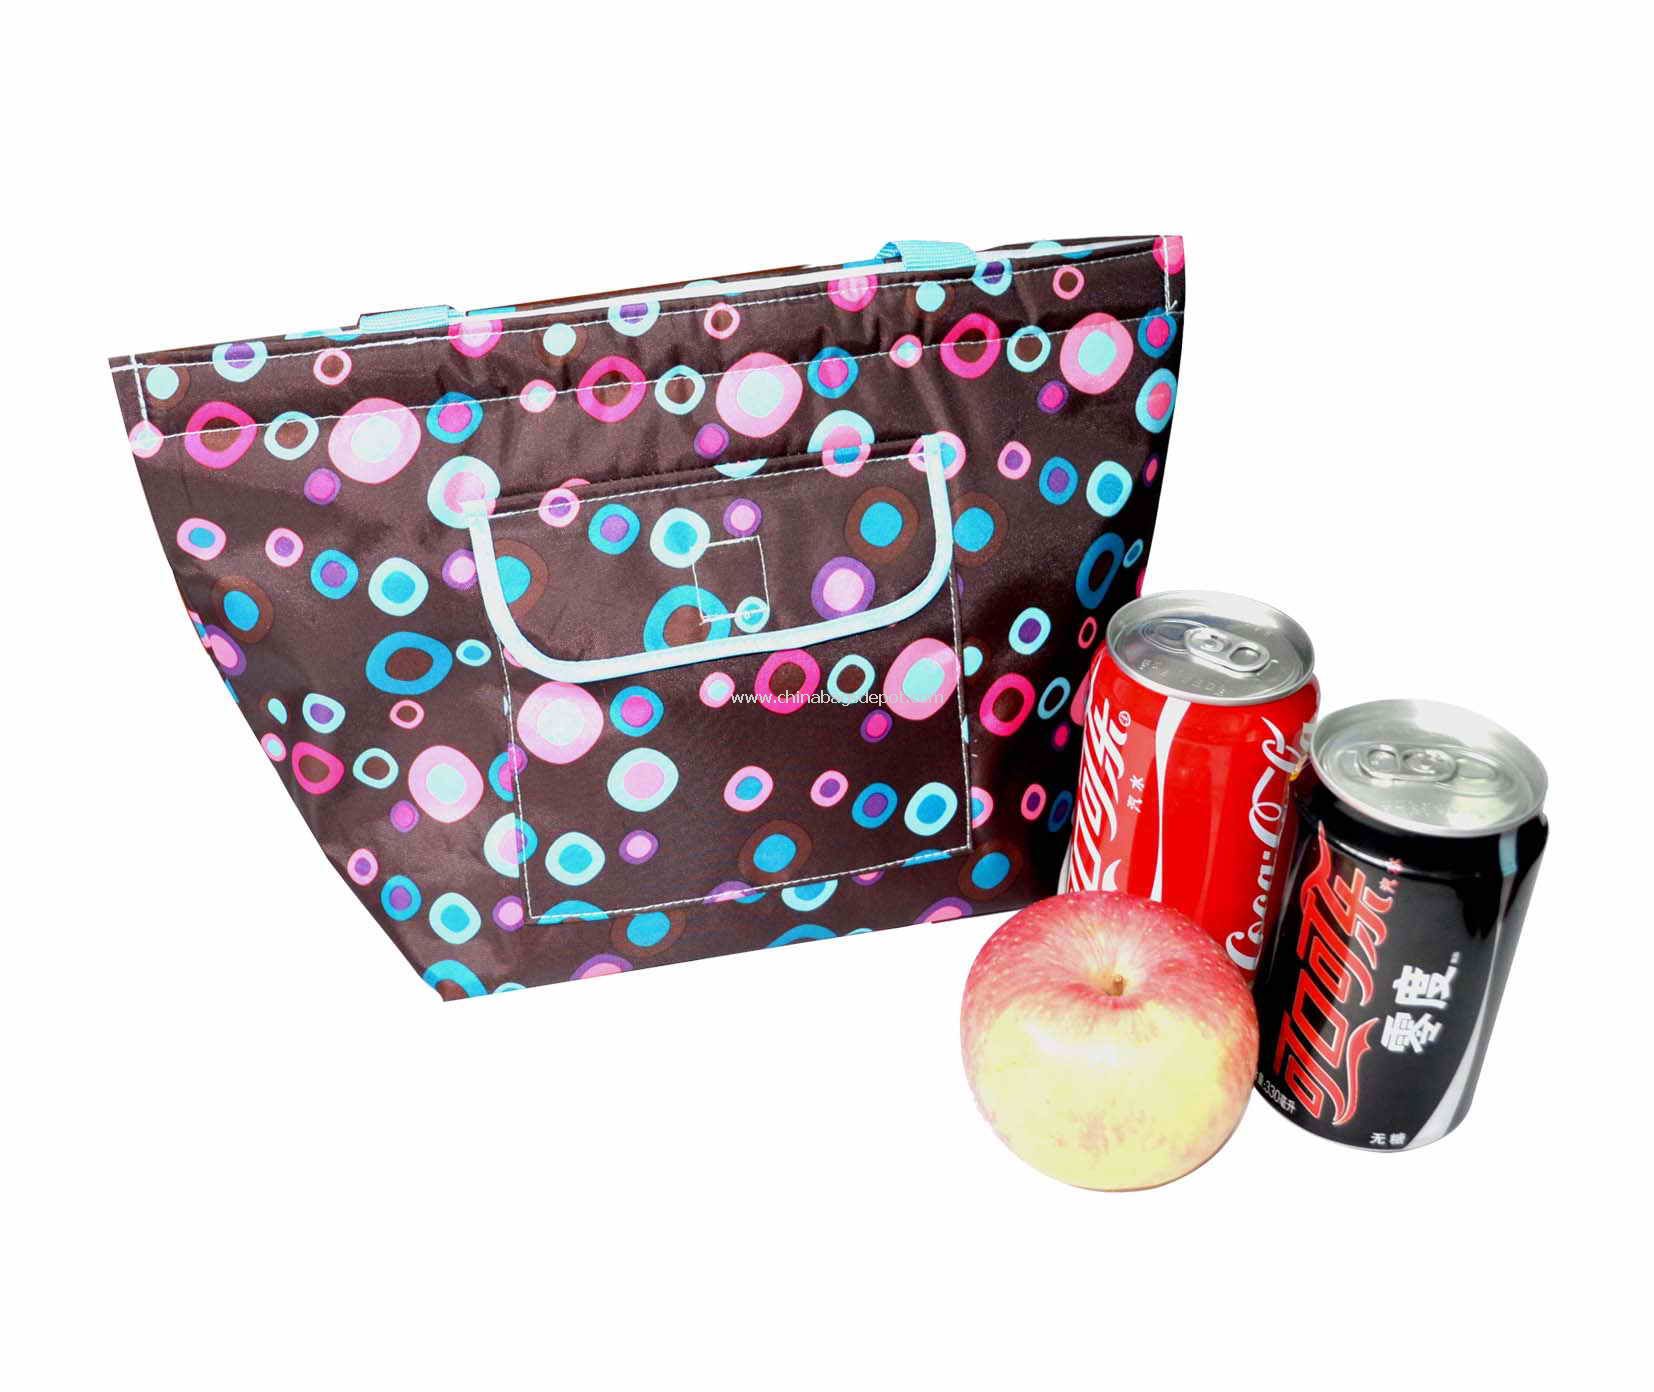 Lunch cooler tote